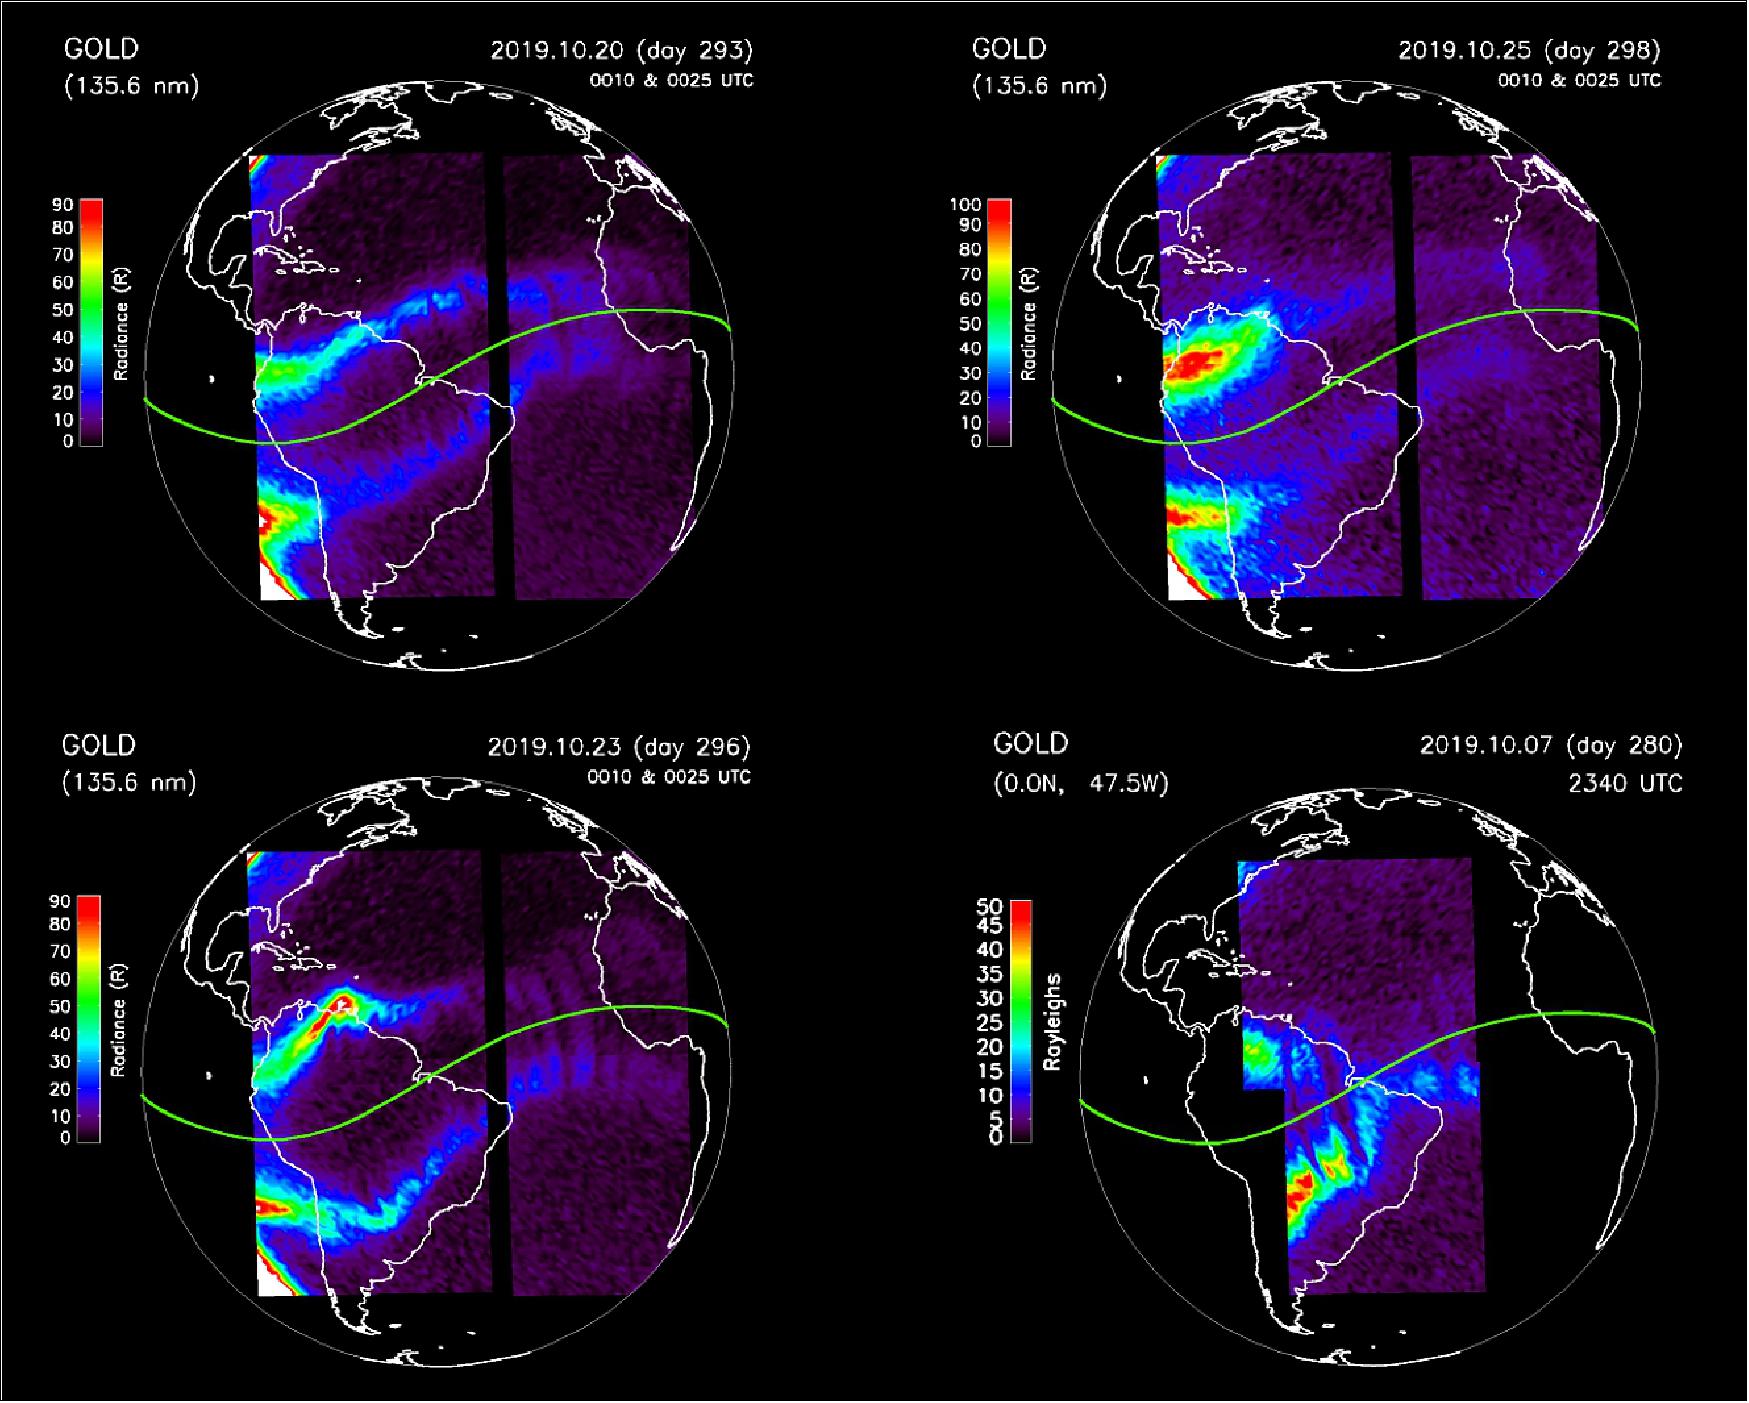 Figure 22: The nighttime ionosphere varies a great deal from night to night. These panels show the density and shifting location of the nighttime ionosphere between Oct. 7-25, 2019. Most of the ions are oxygen ions. At night, when they recombine with electrons, they emit light at a specific wavelength — 135.6 nm — which GOLD observes. Regions of higher ion density produce brighter emissions. Radio disturbances often occur when longitudinal gaps develop, such as the one off the east coast of South America in the top left image. Why the nighttime ionosphere varies so much — even during quiet geomagnetic conditions — is not understood (image credit: NASA/GOLD/Robert Daniell)